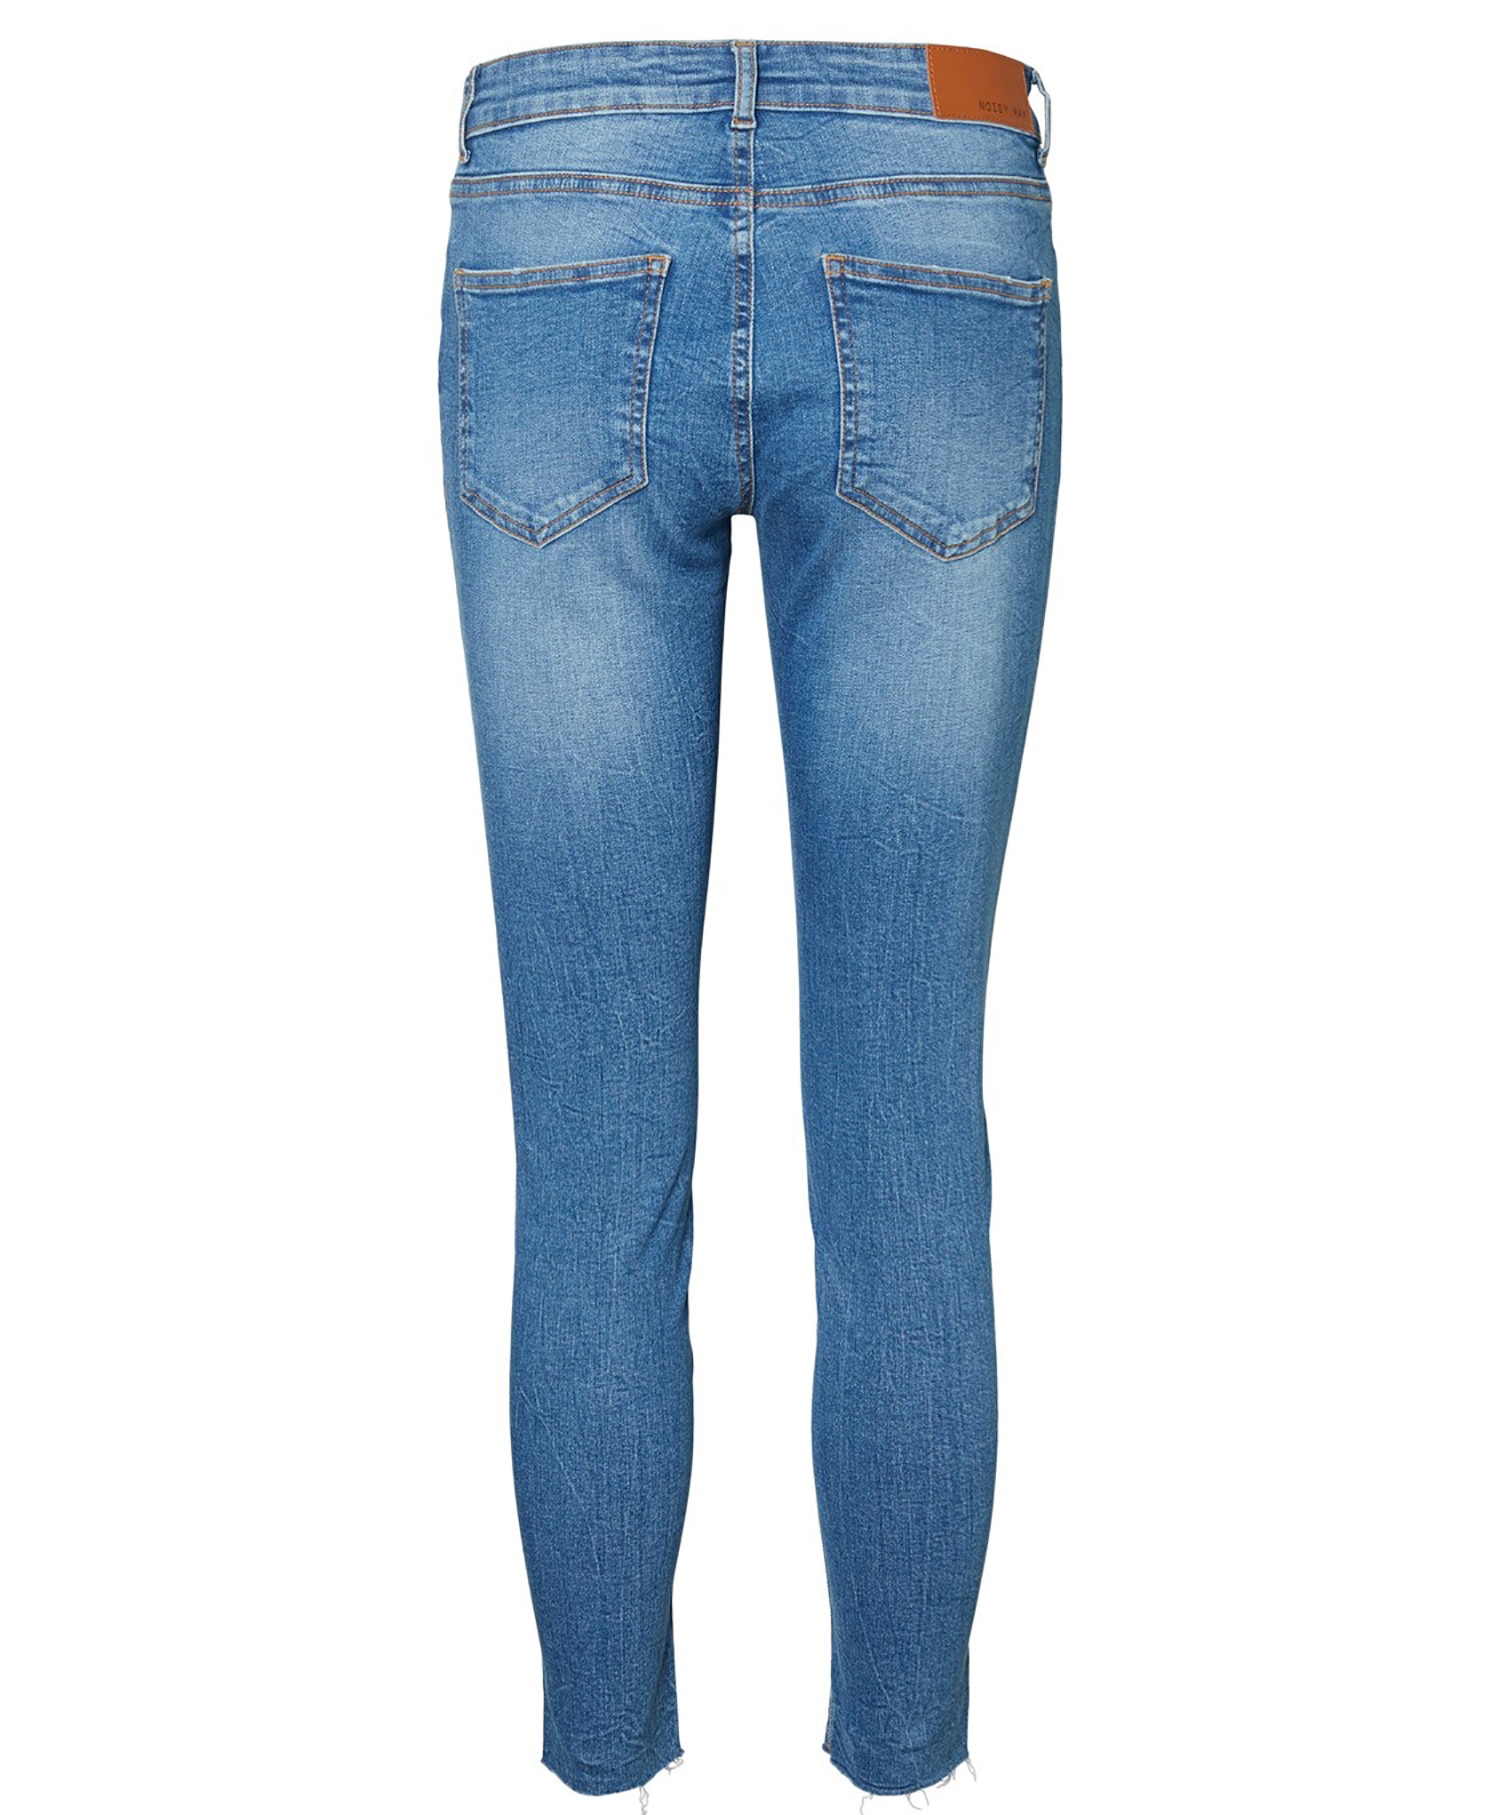 Noisy May LUCY ANK JEANS